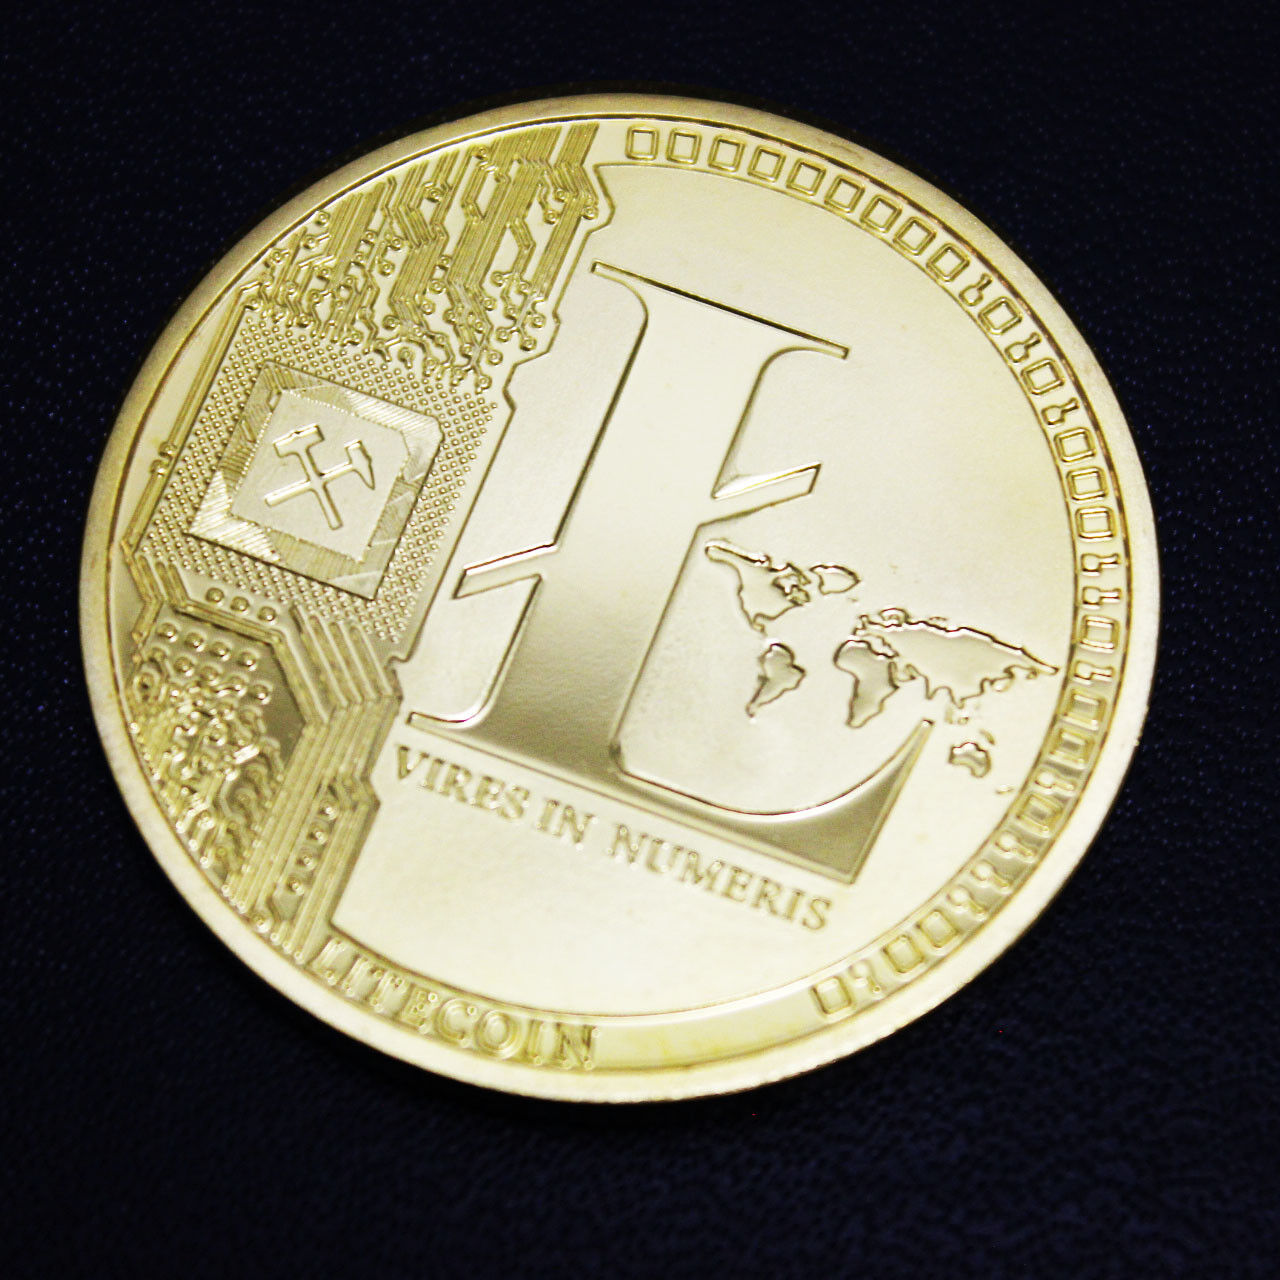 Litcoin LTC Gold Plated Commemorative Coin Collectible Canada FREE FAST SHIPPING